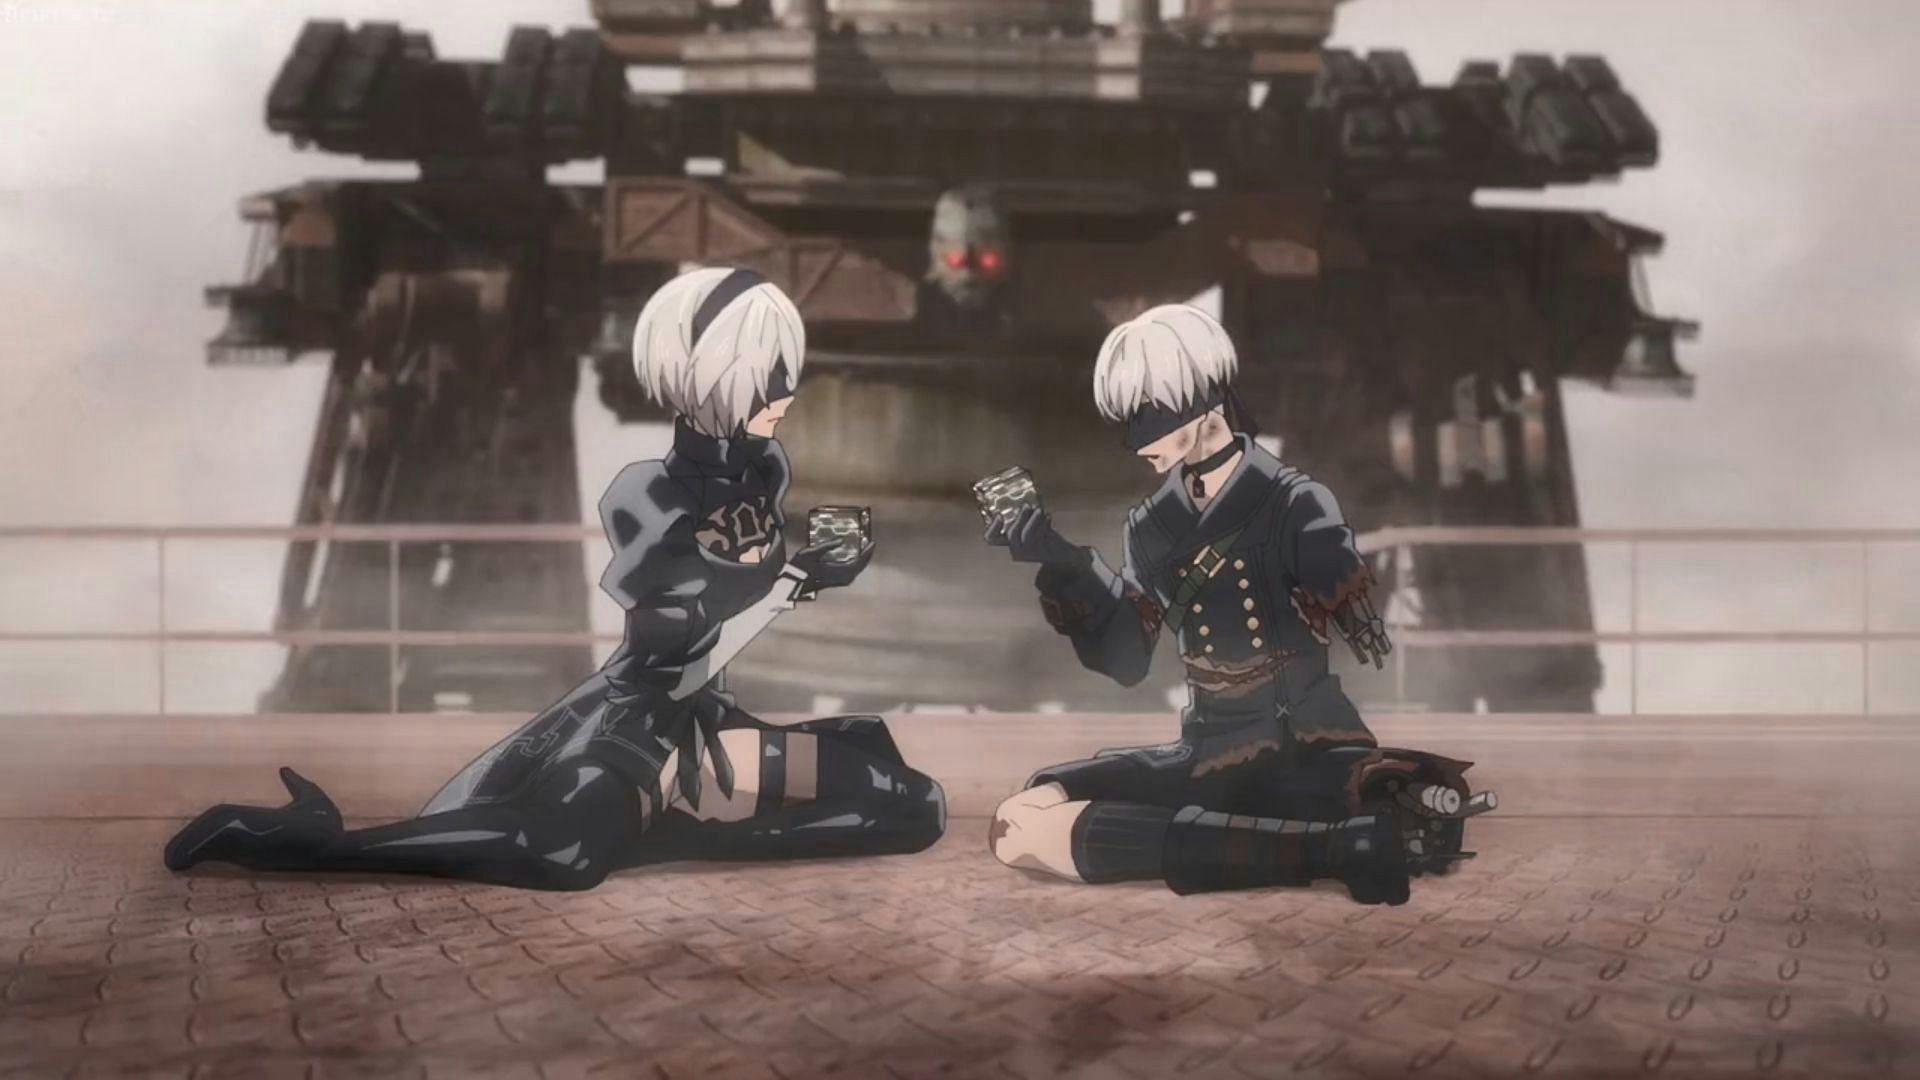 NieR Automata Ver11a is already the mustwatch anime of the season